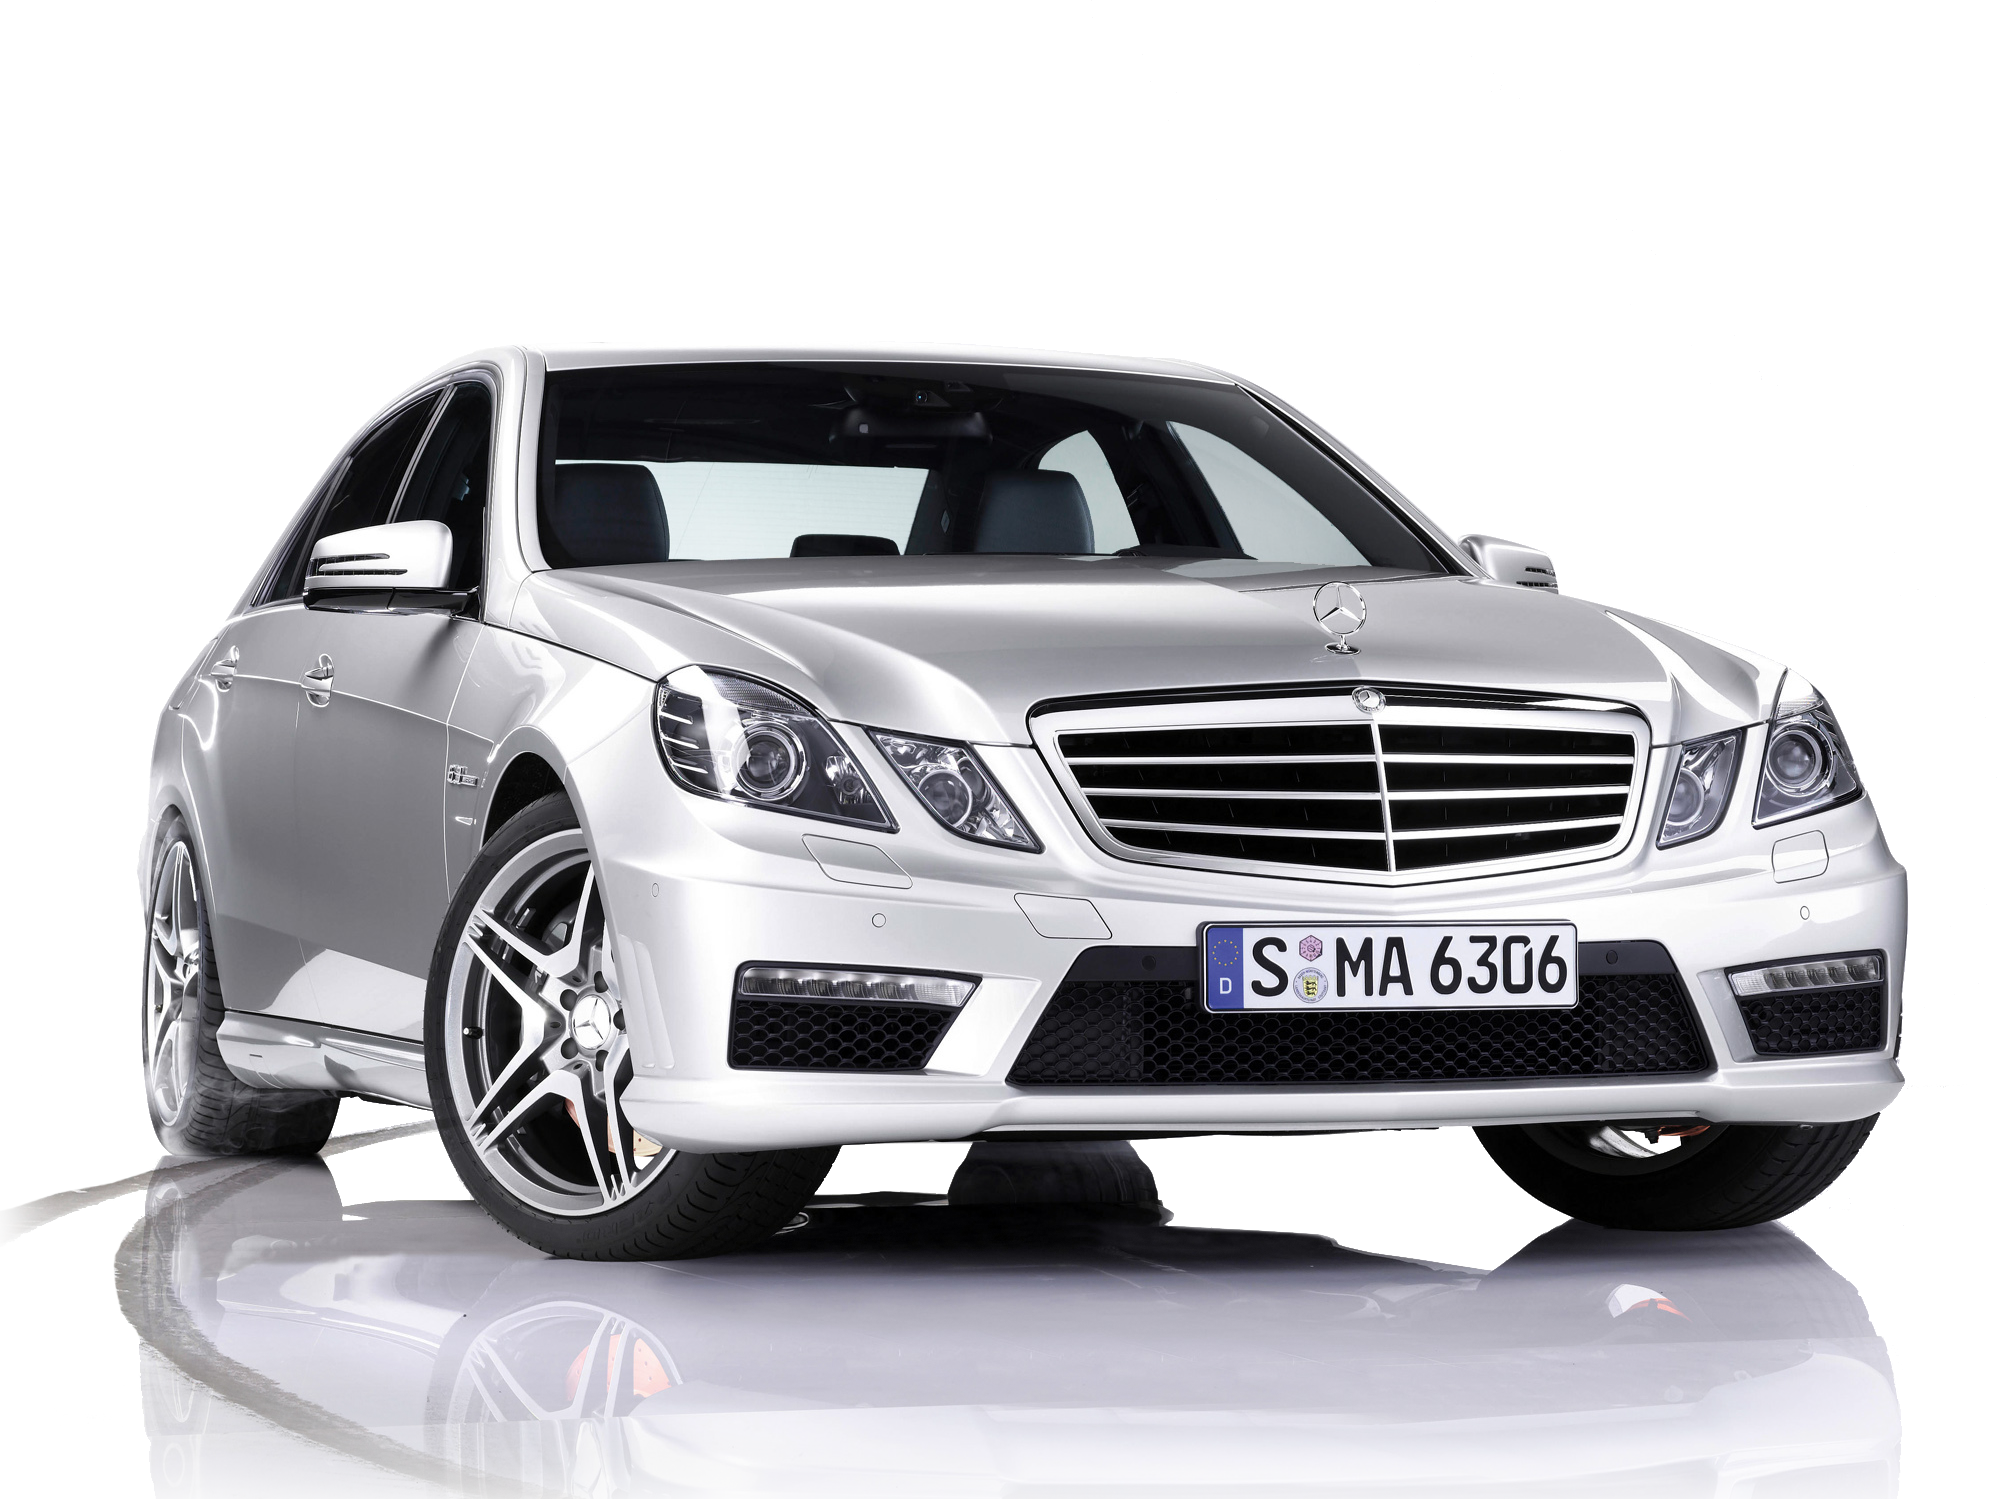 Mercedes-Benz Free PNG Image